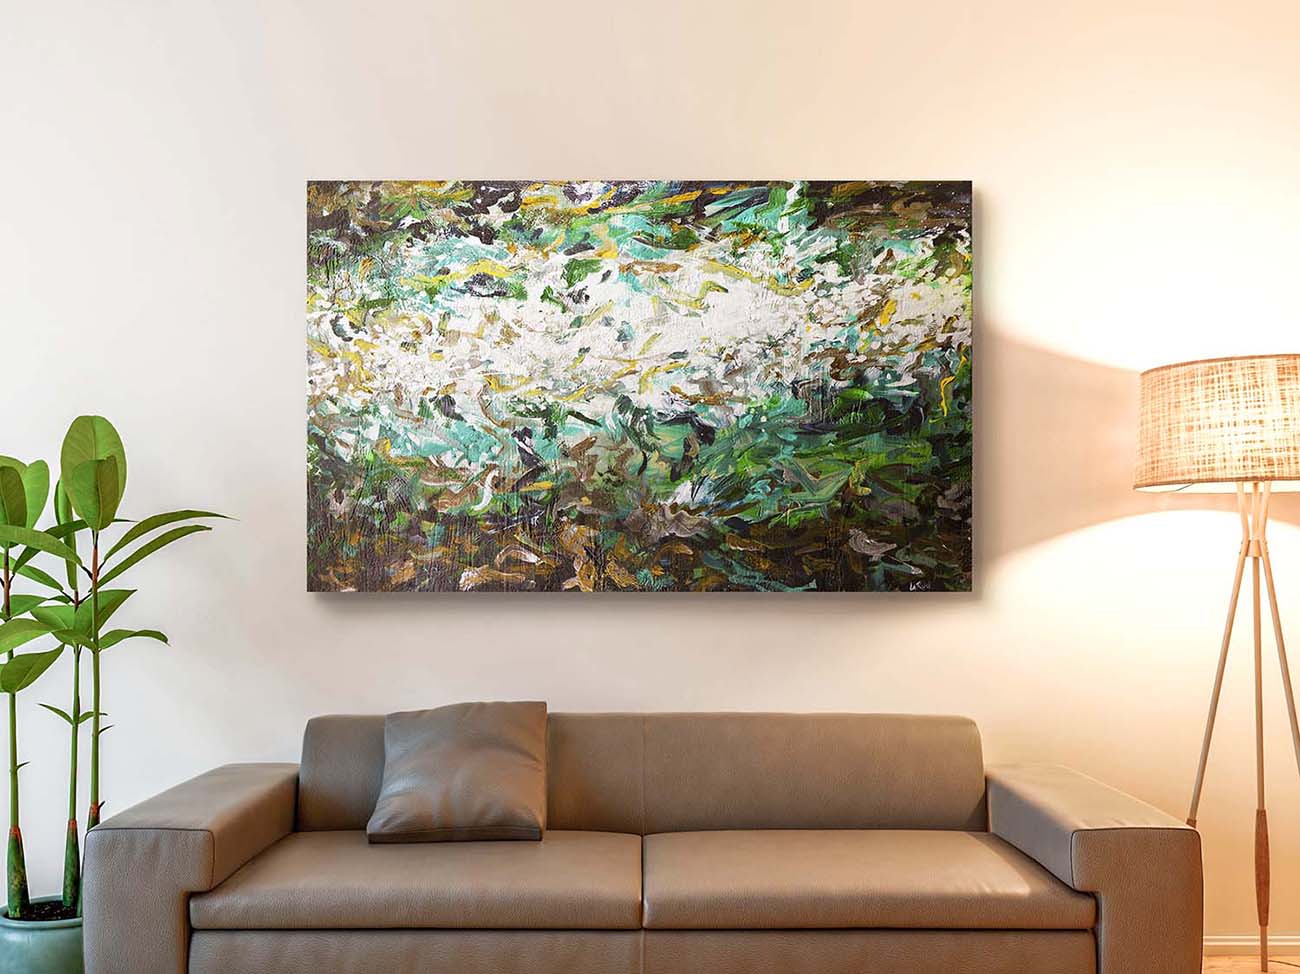 Aqualoid abstract oil on canvas by Doug LaRue over a couch